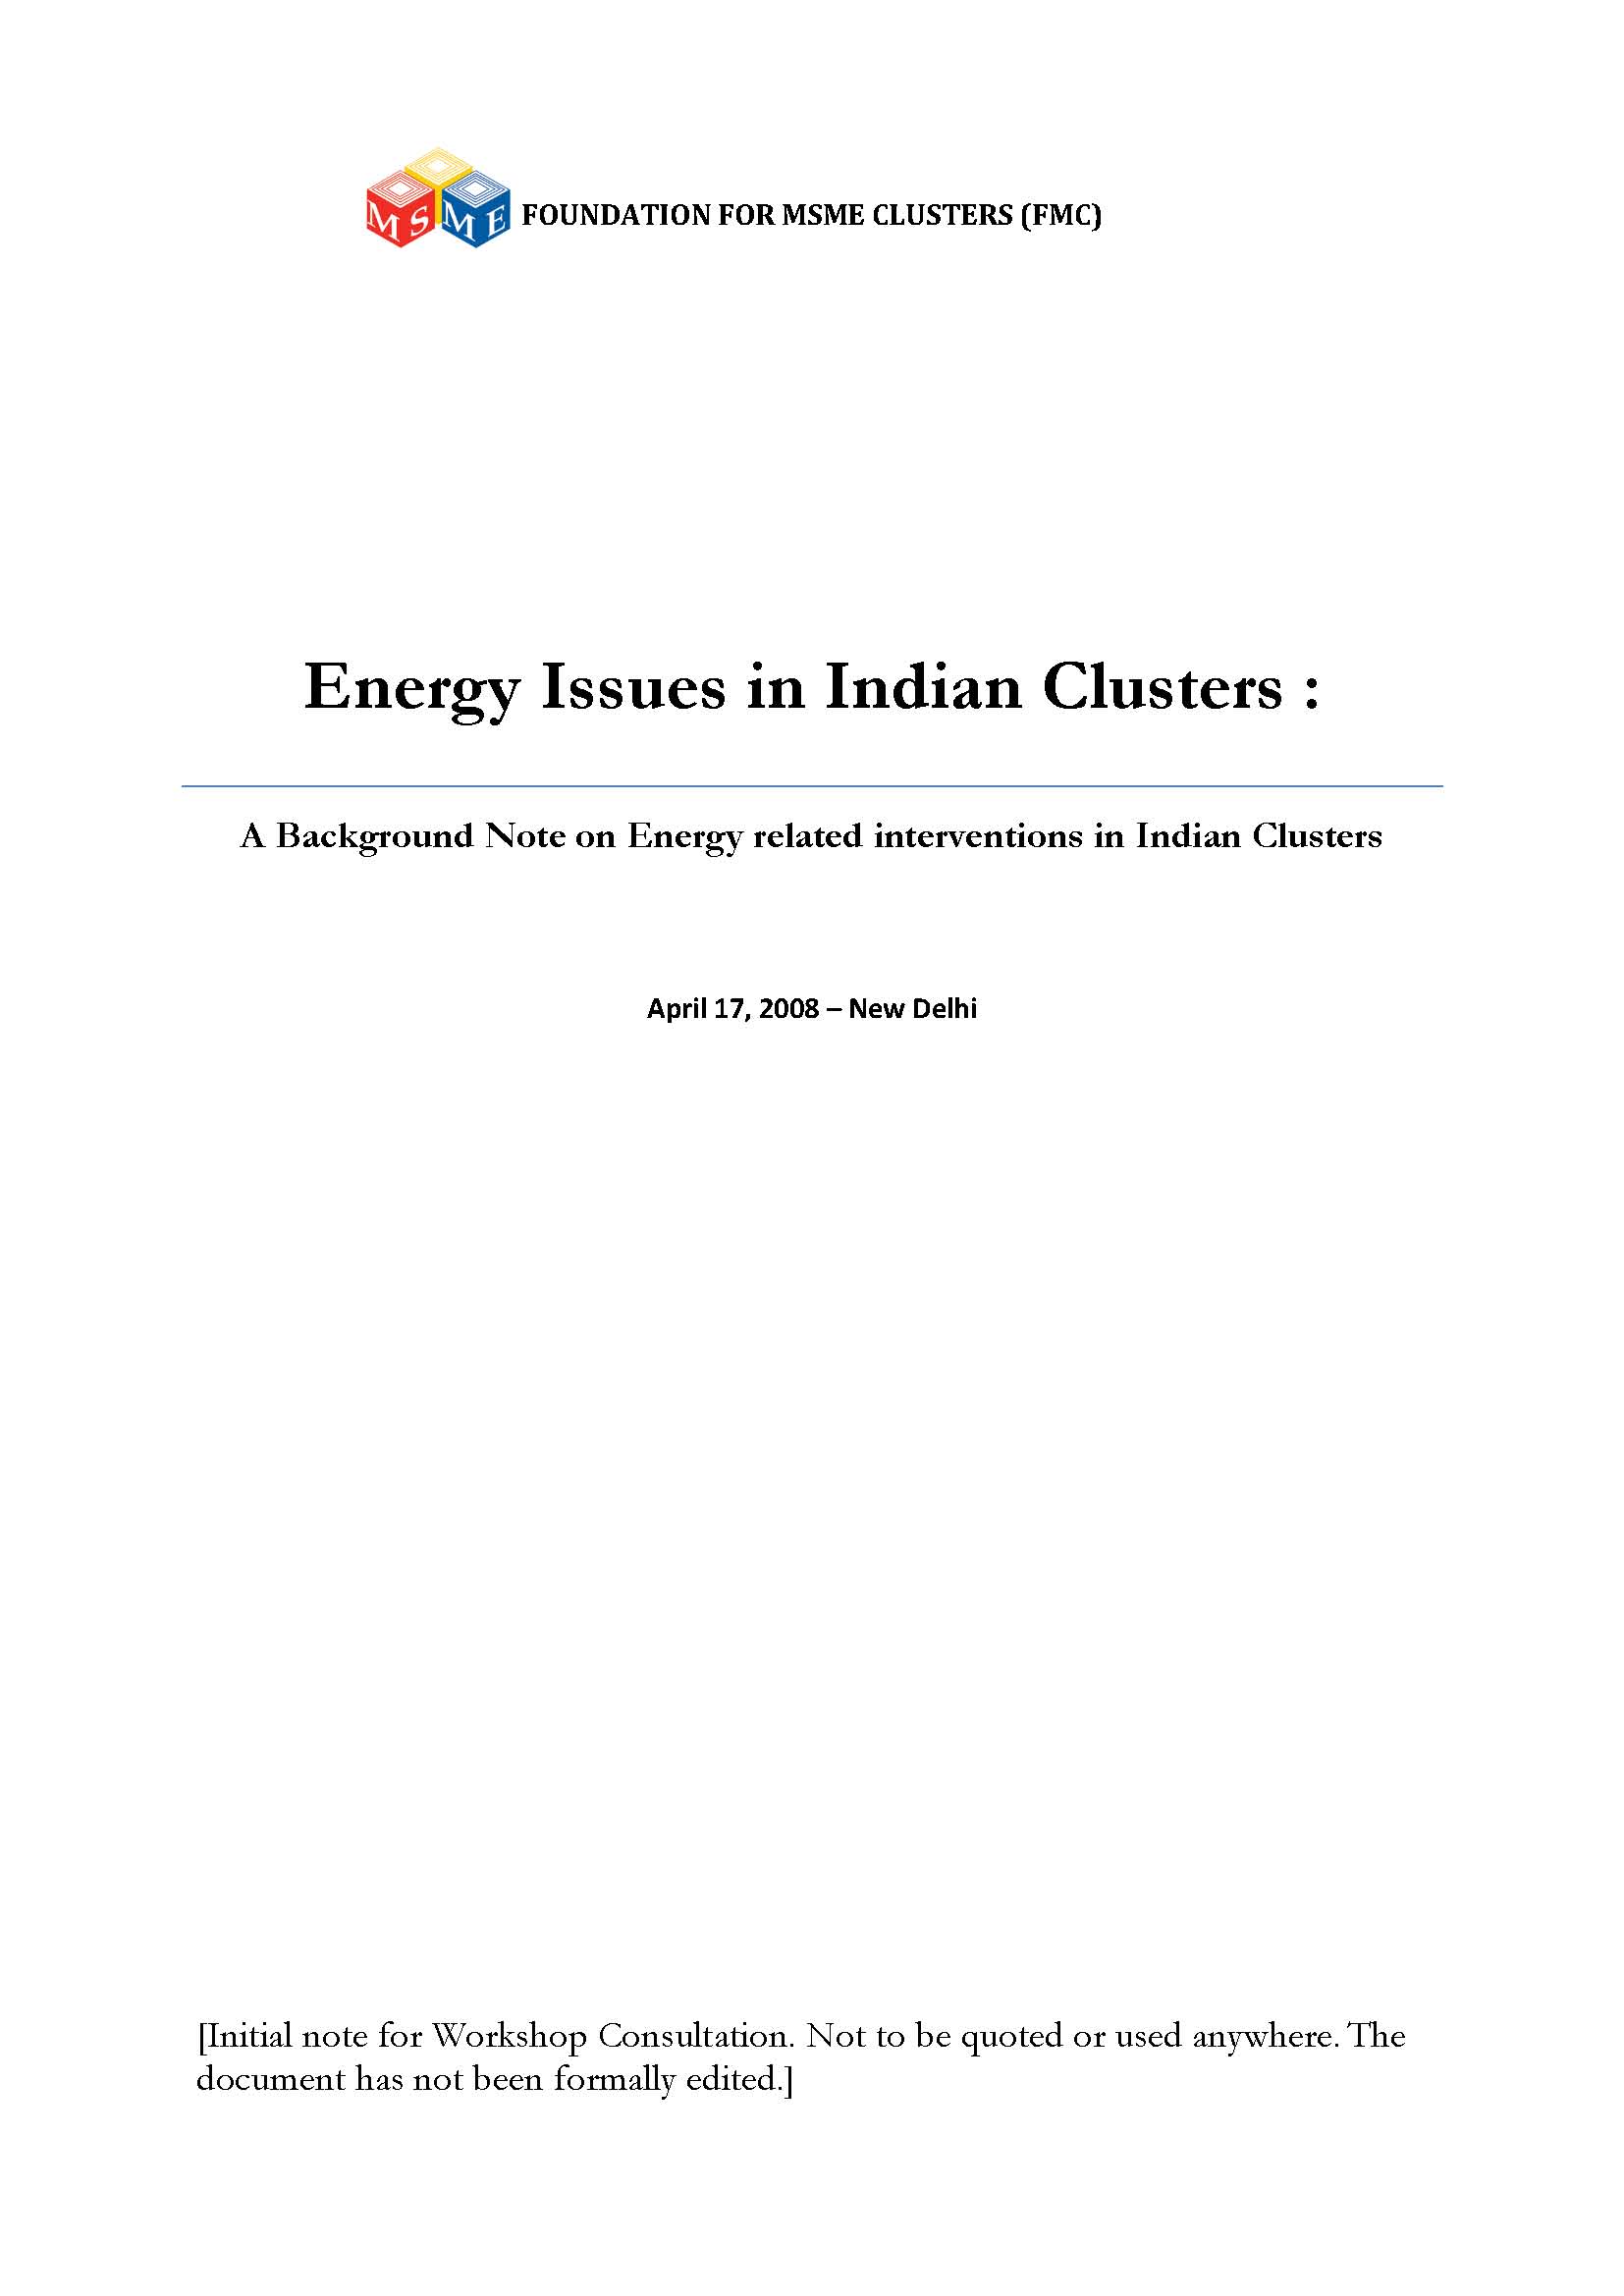 Energy Issues in Indian Clusters